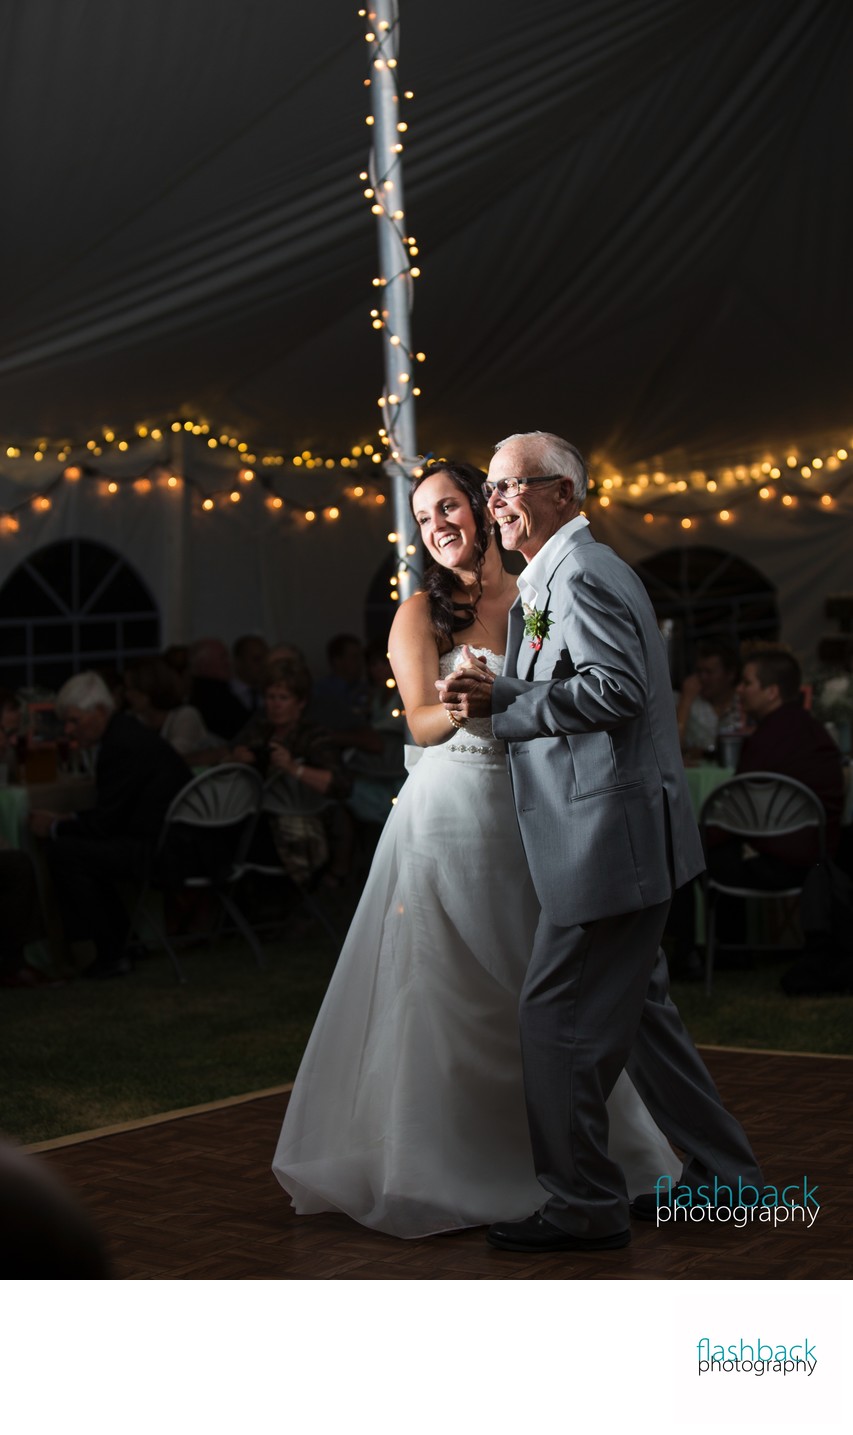 Grandfather Dances with Bride on Wedding Day